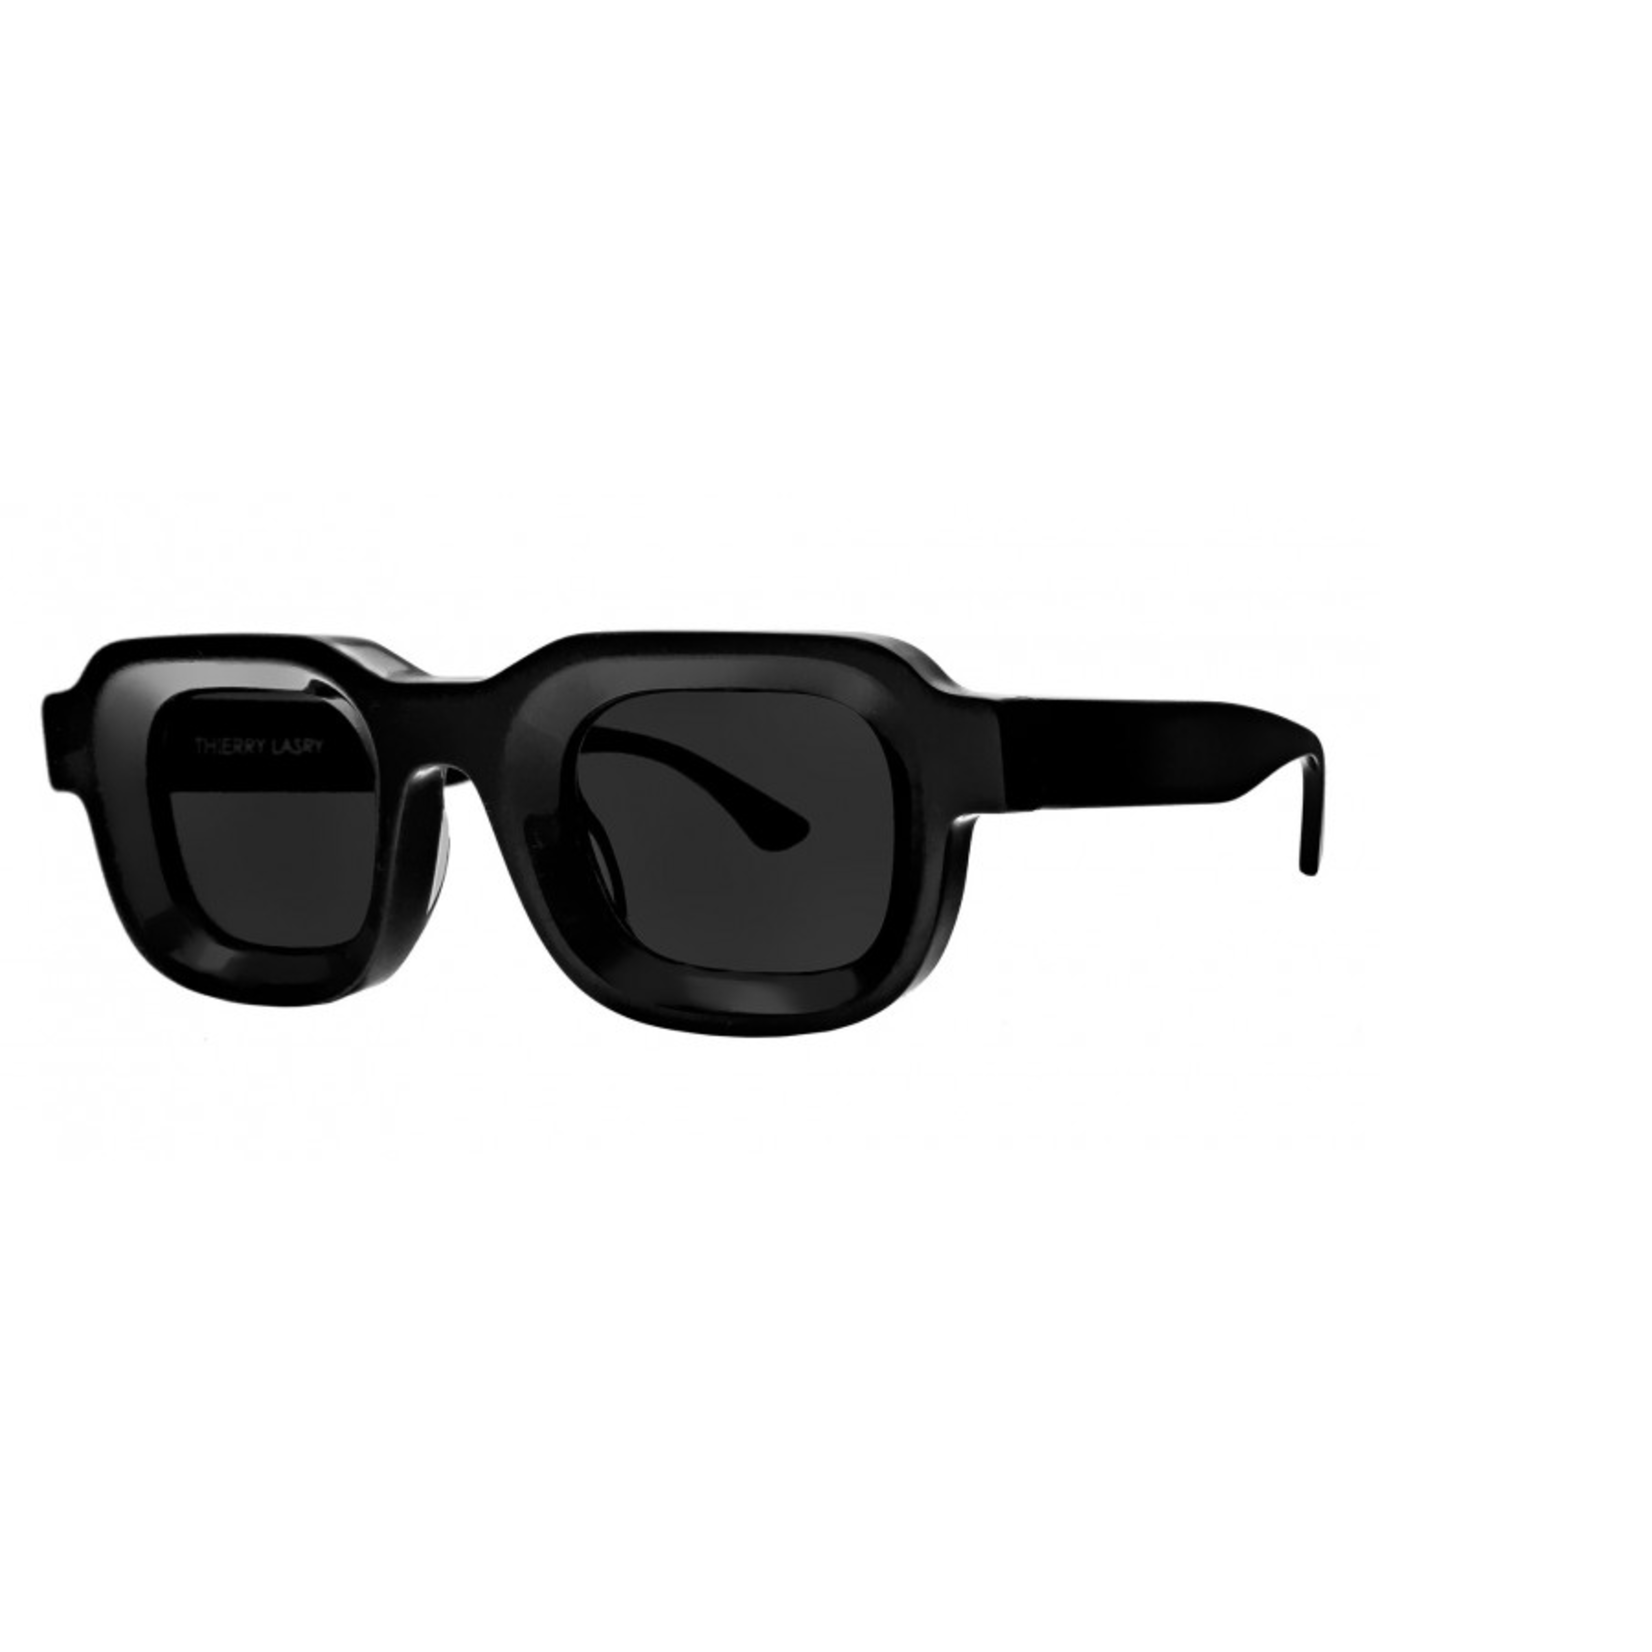 Thierry Lasry Thierry Lasry Narcoty